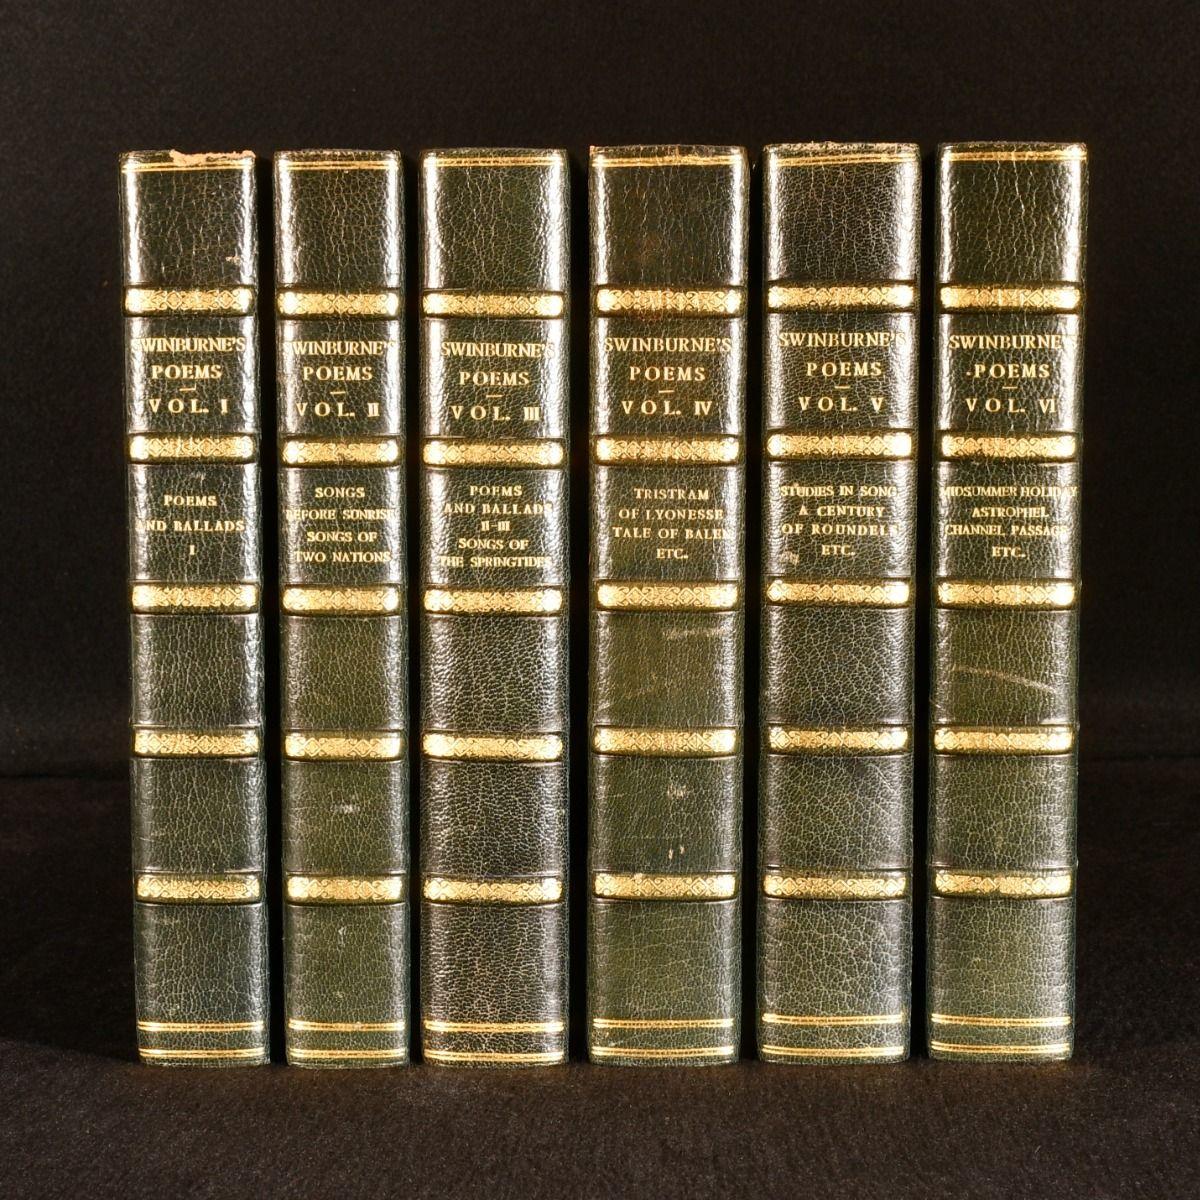 A very scarce limited edition set of the poetry of Algernon Charles Swinburne, in handsome half morocco signed bindings by Riviere.

A very scarce large-paper limited edition set, with this being number forty-four of one-hundred sets available for